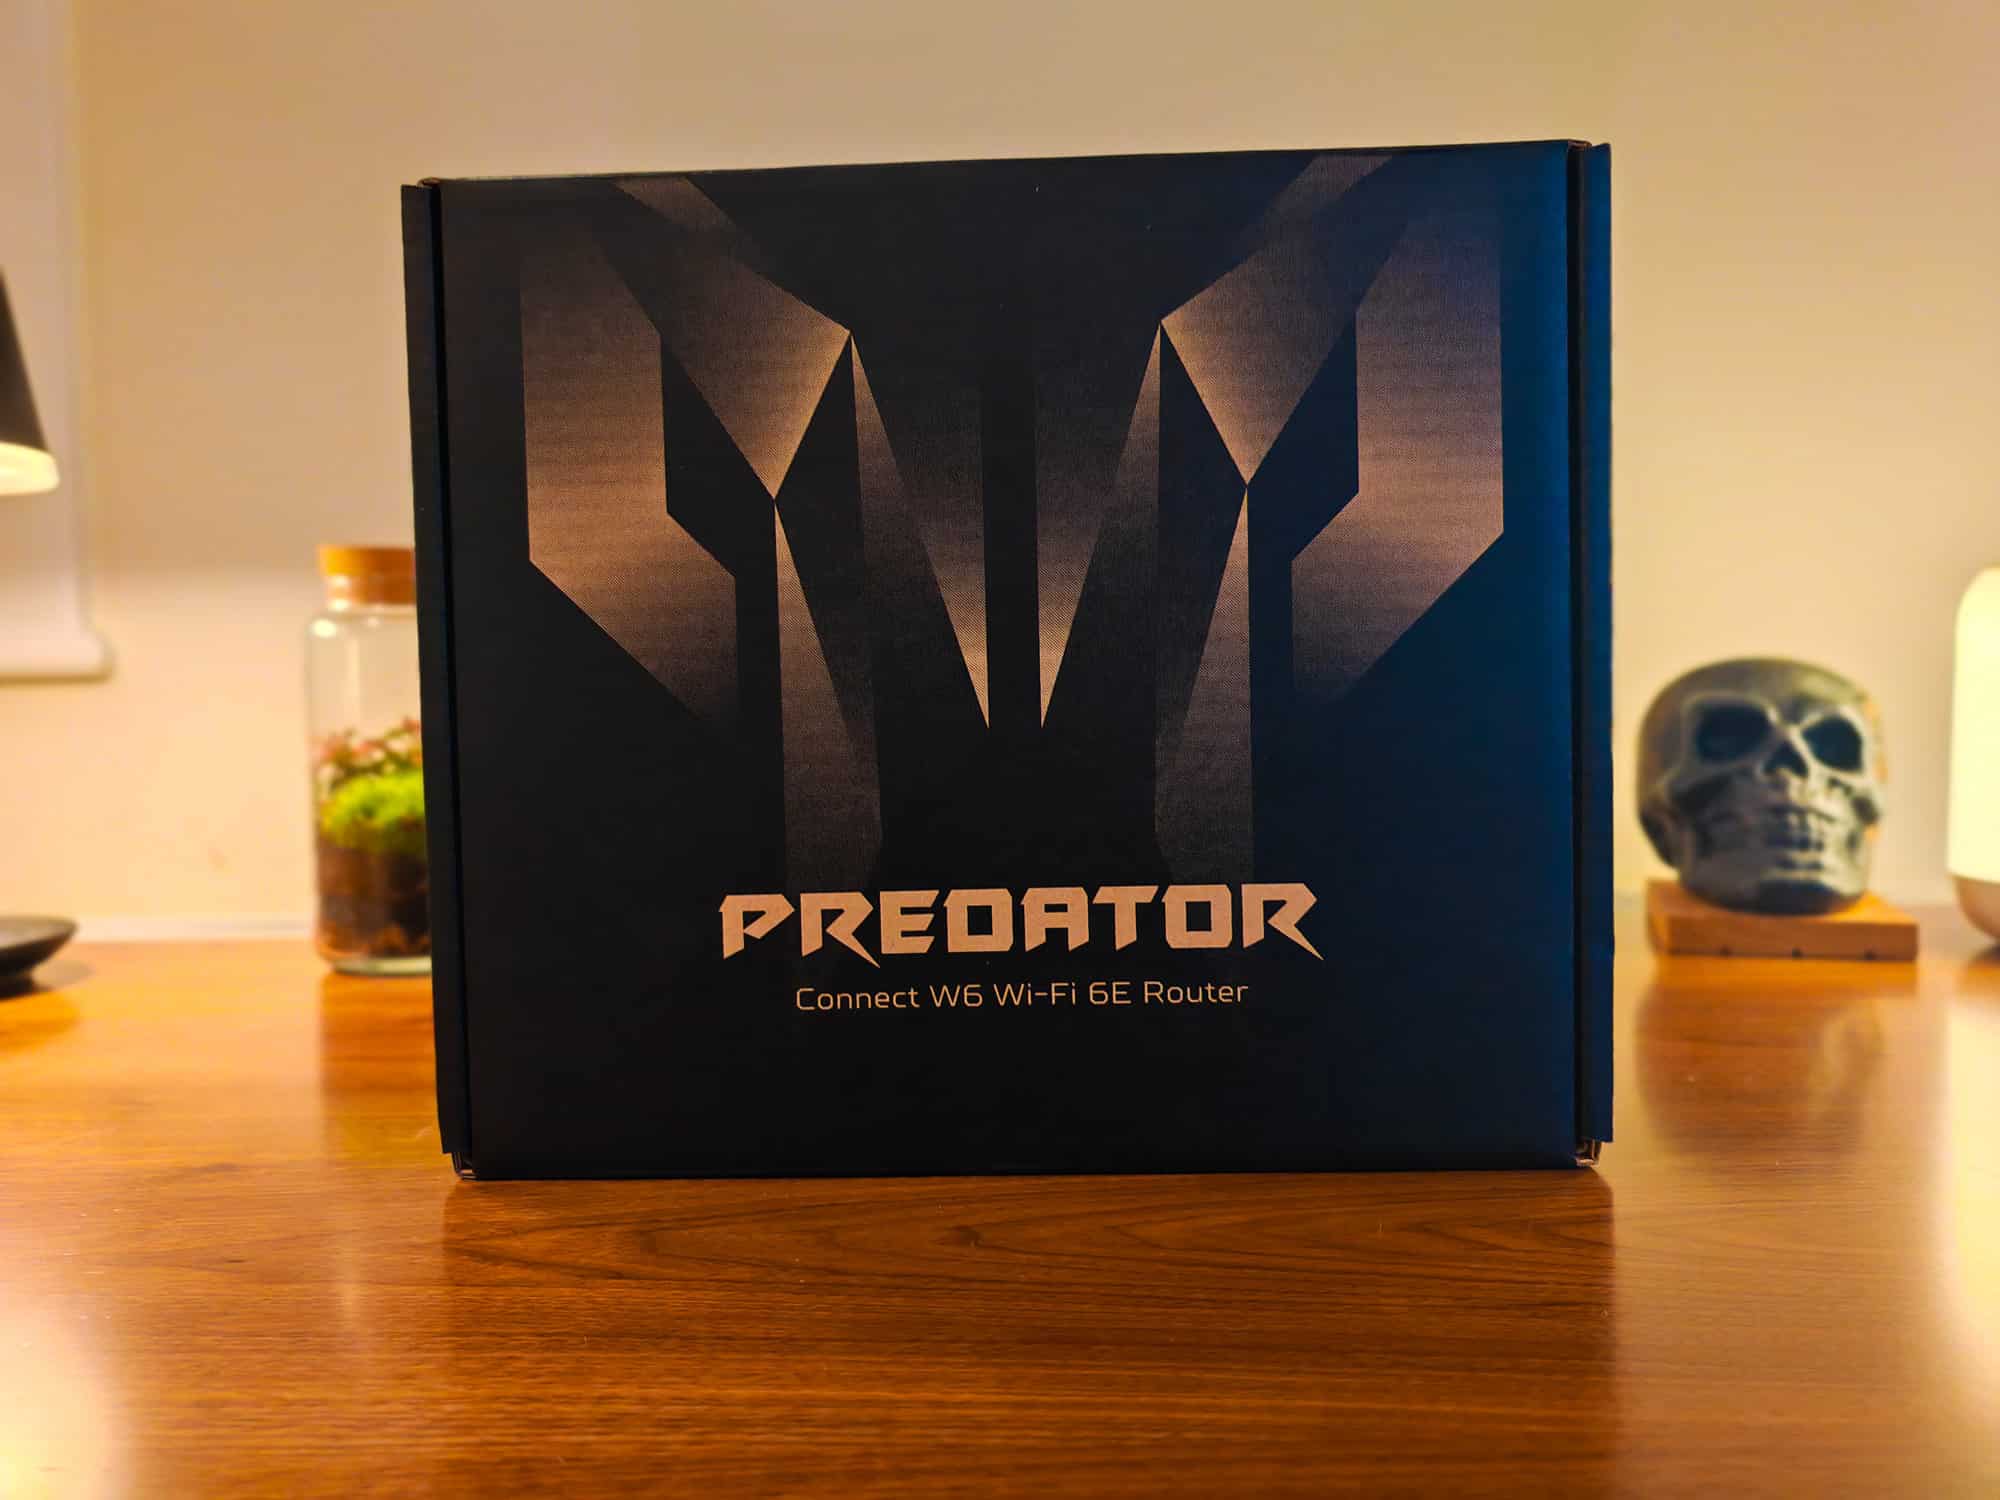 Acer Predator Connect W6 Wi Fi 6E Router Review